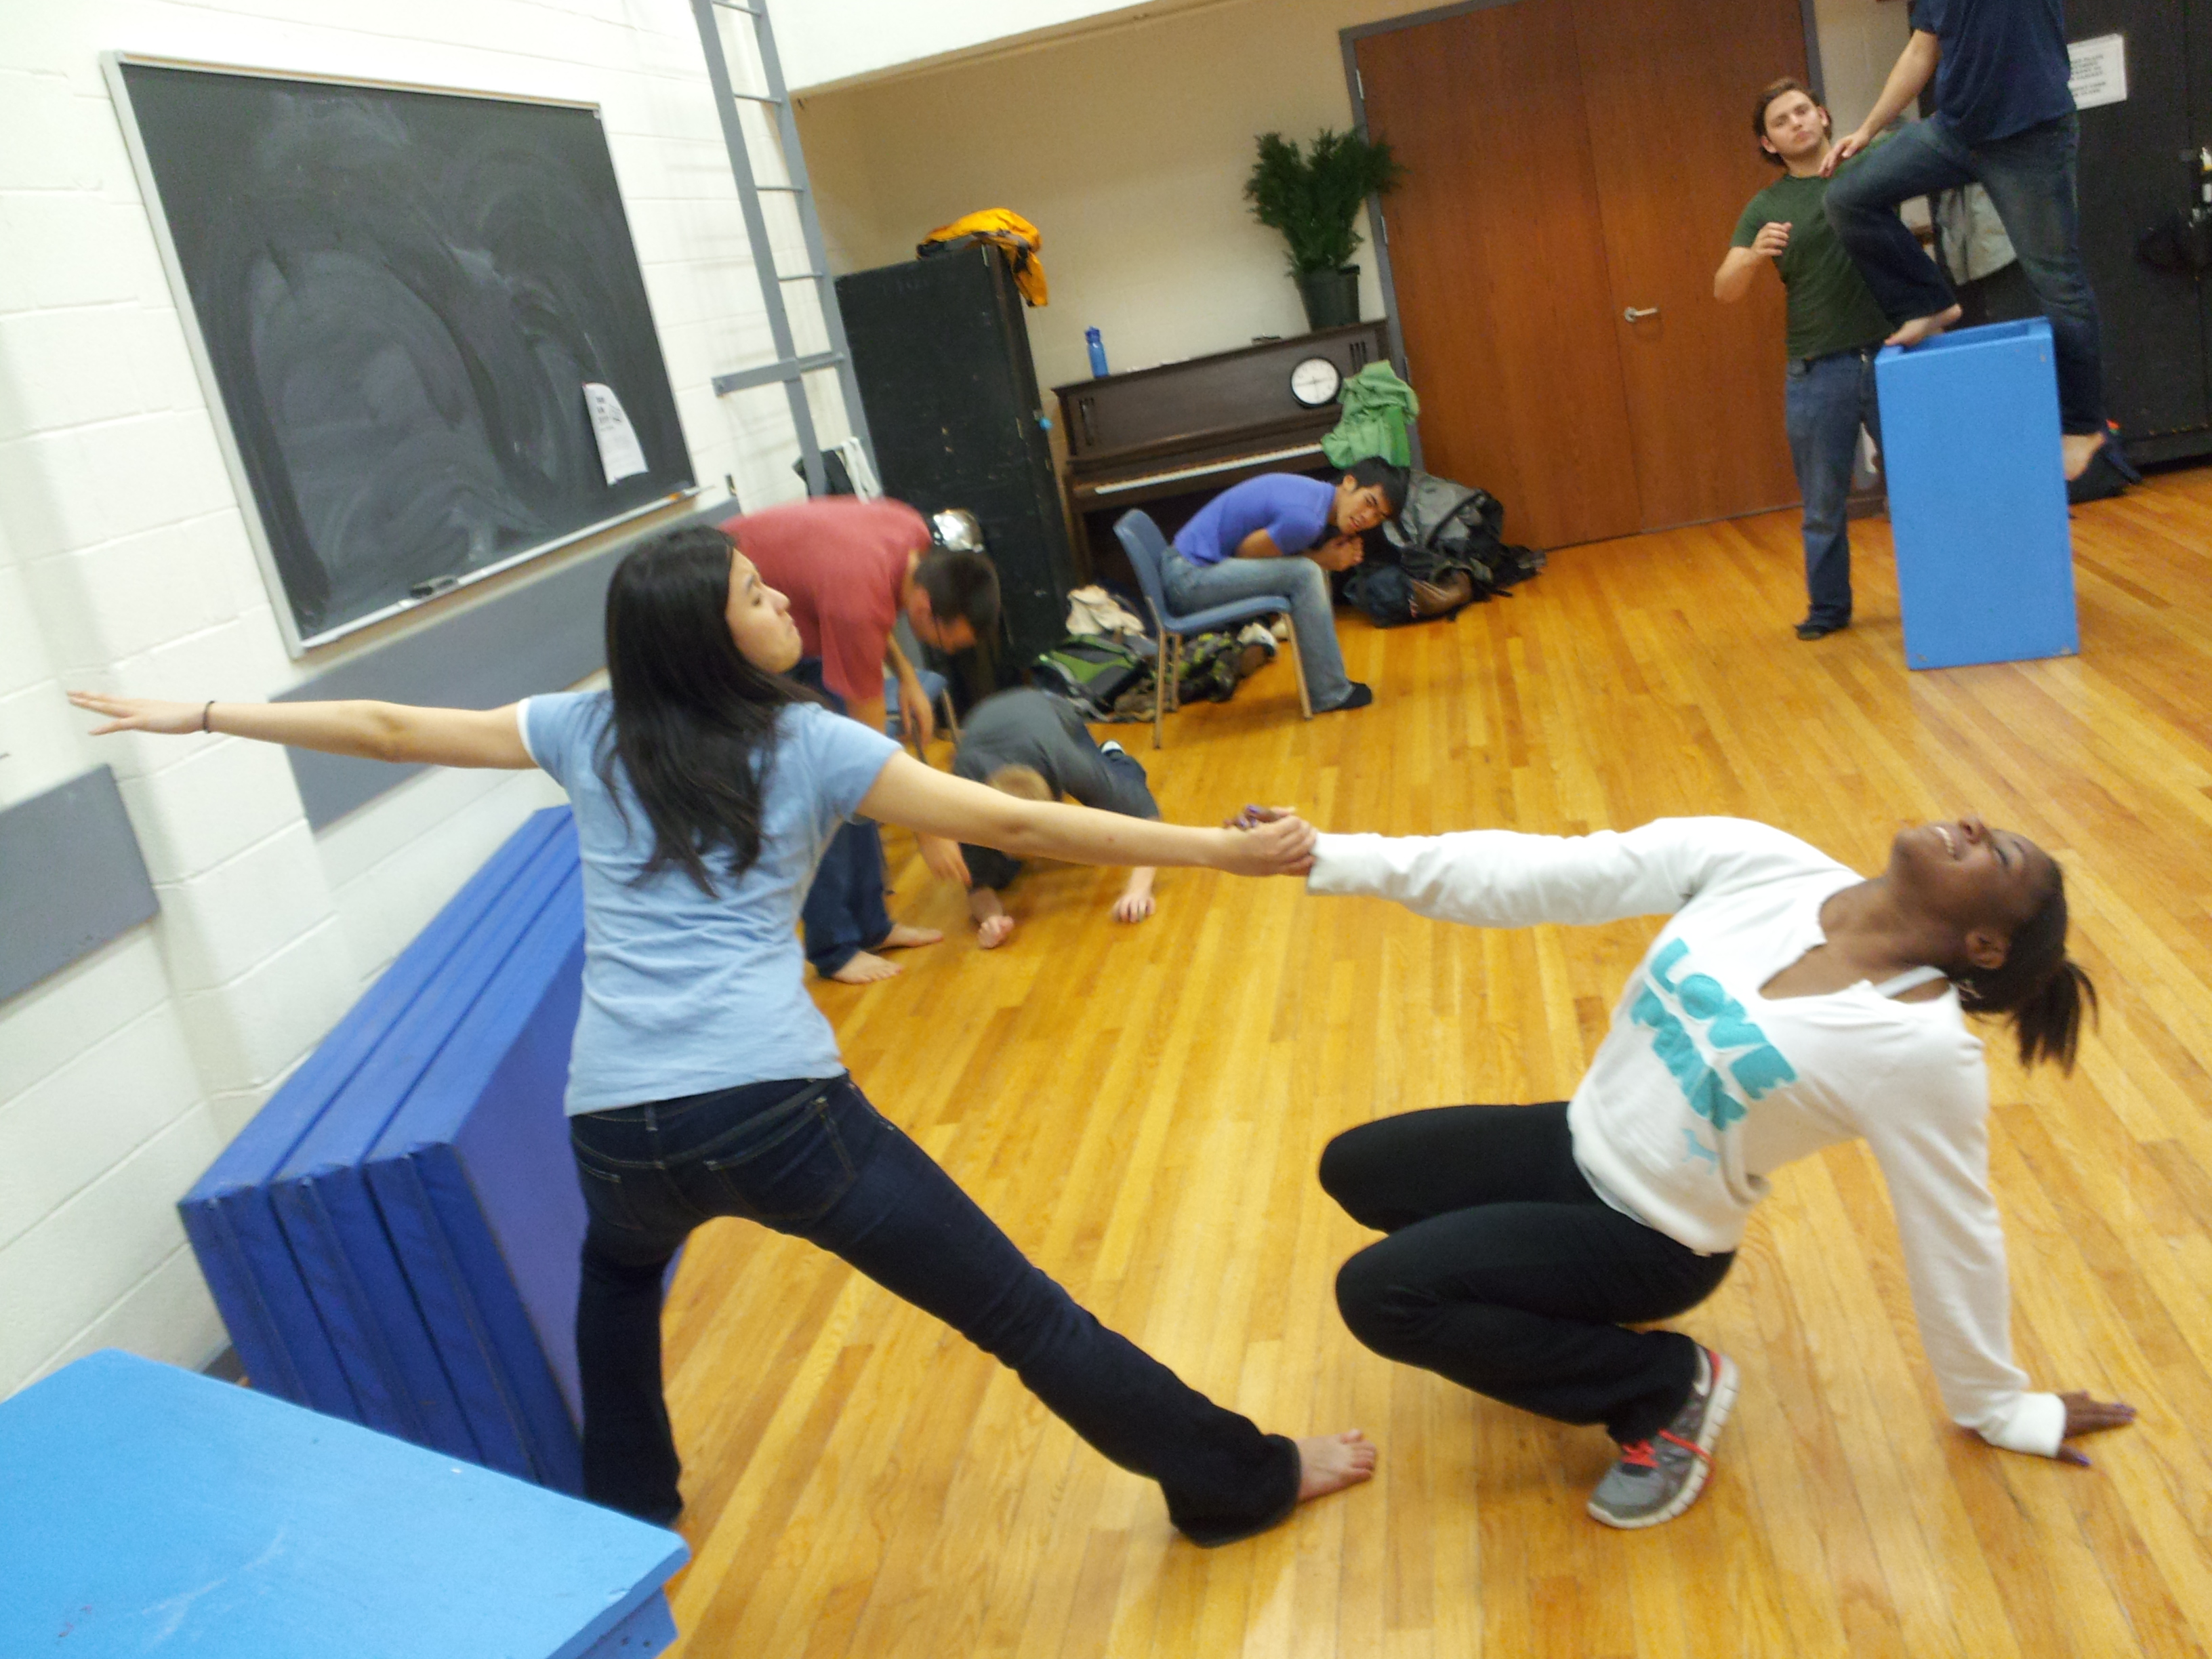 Jessica Wang, left, and Peyton Chaney, right, rehearse a dance together